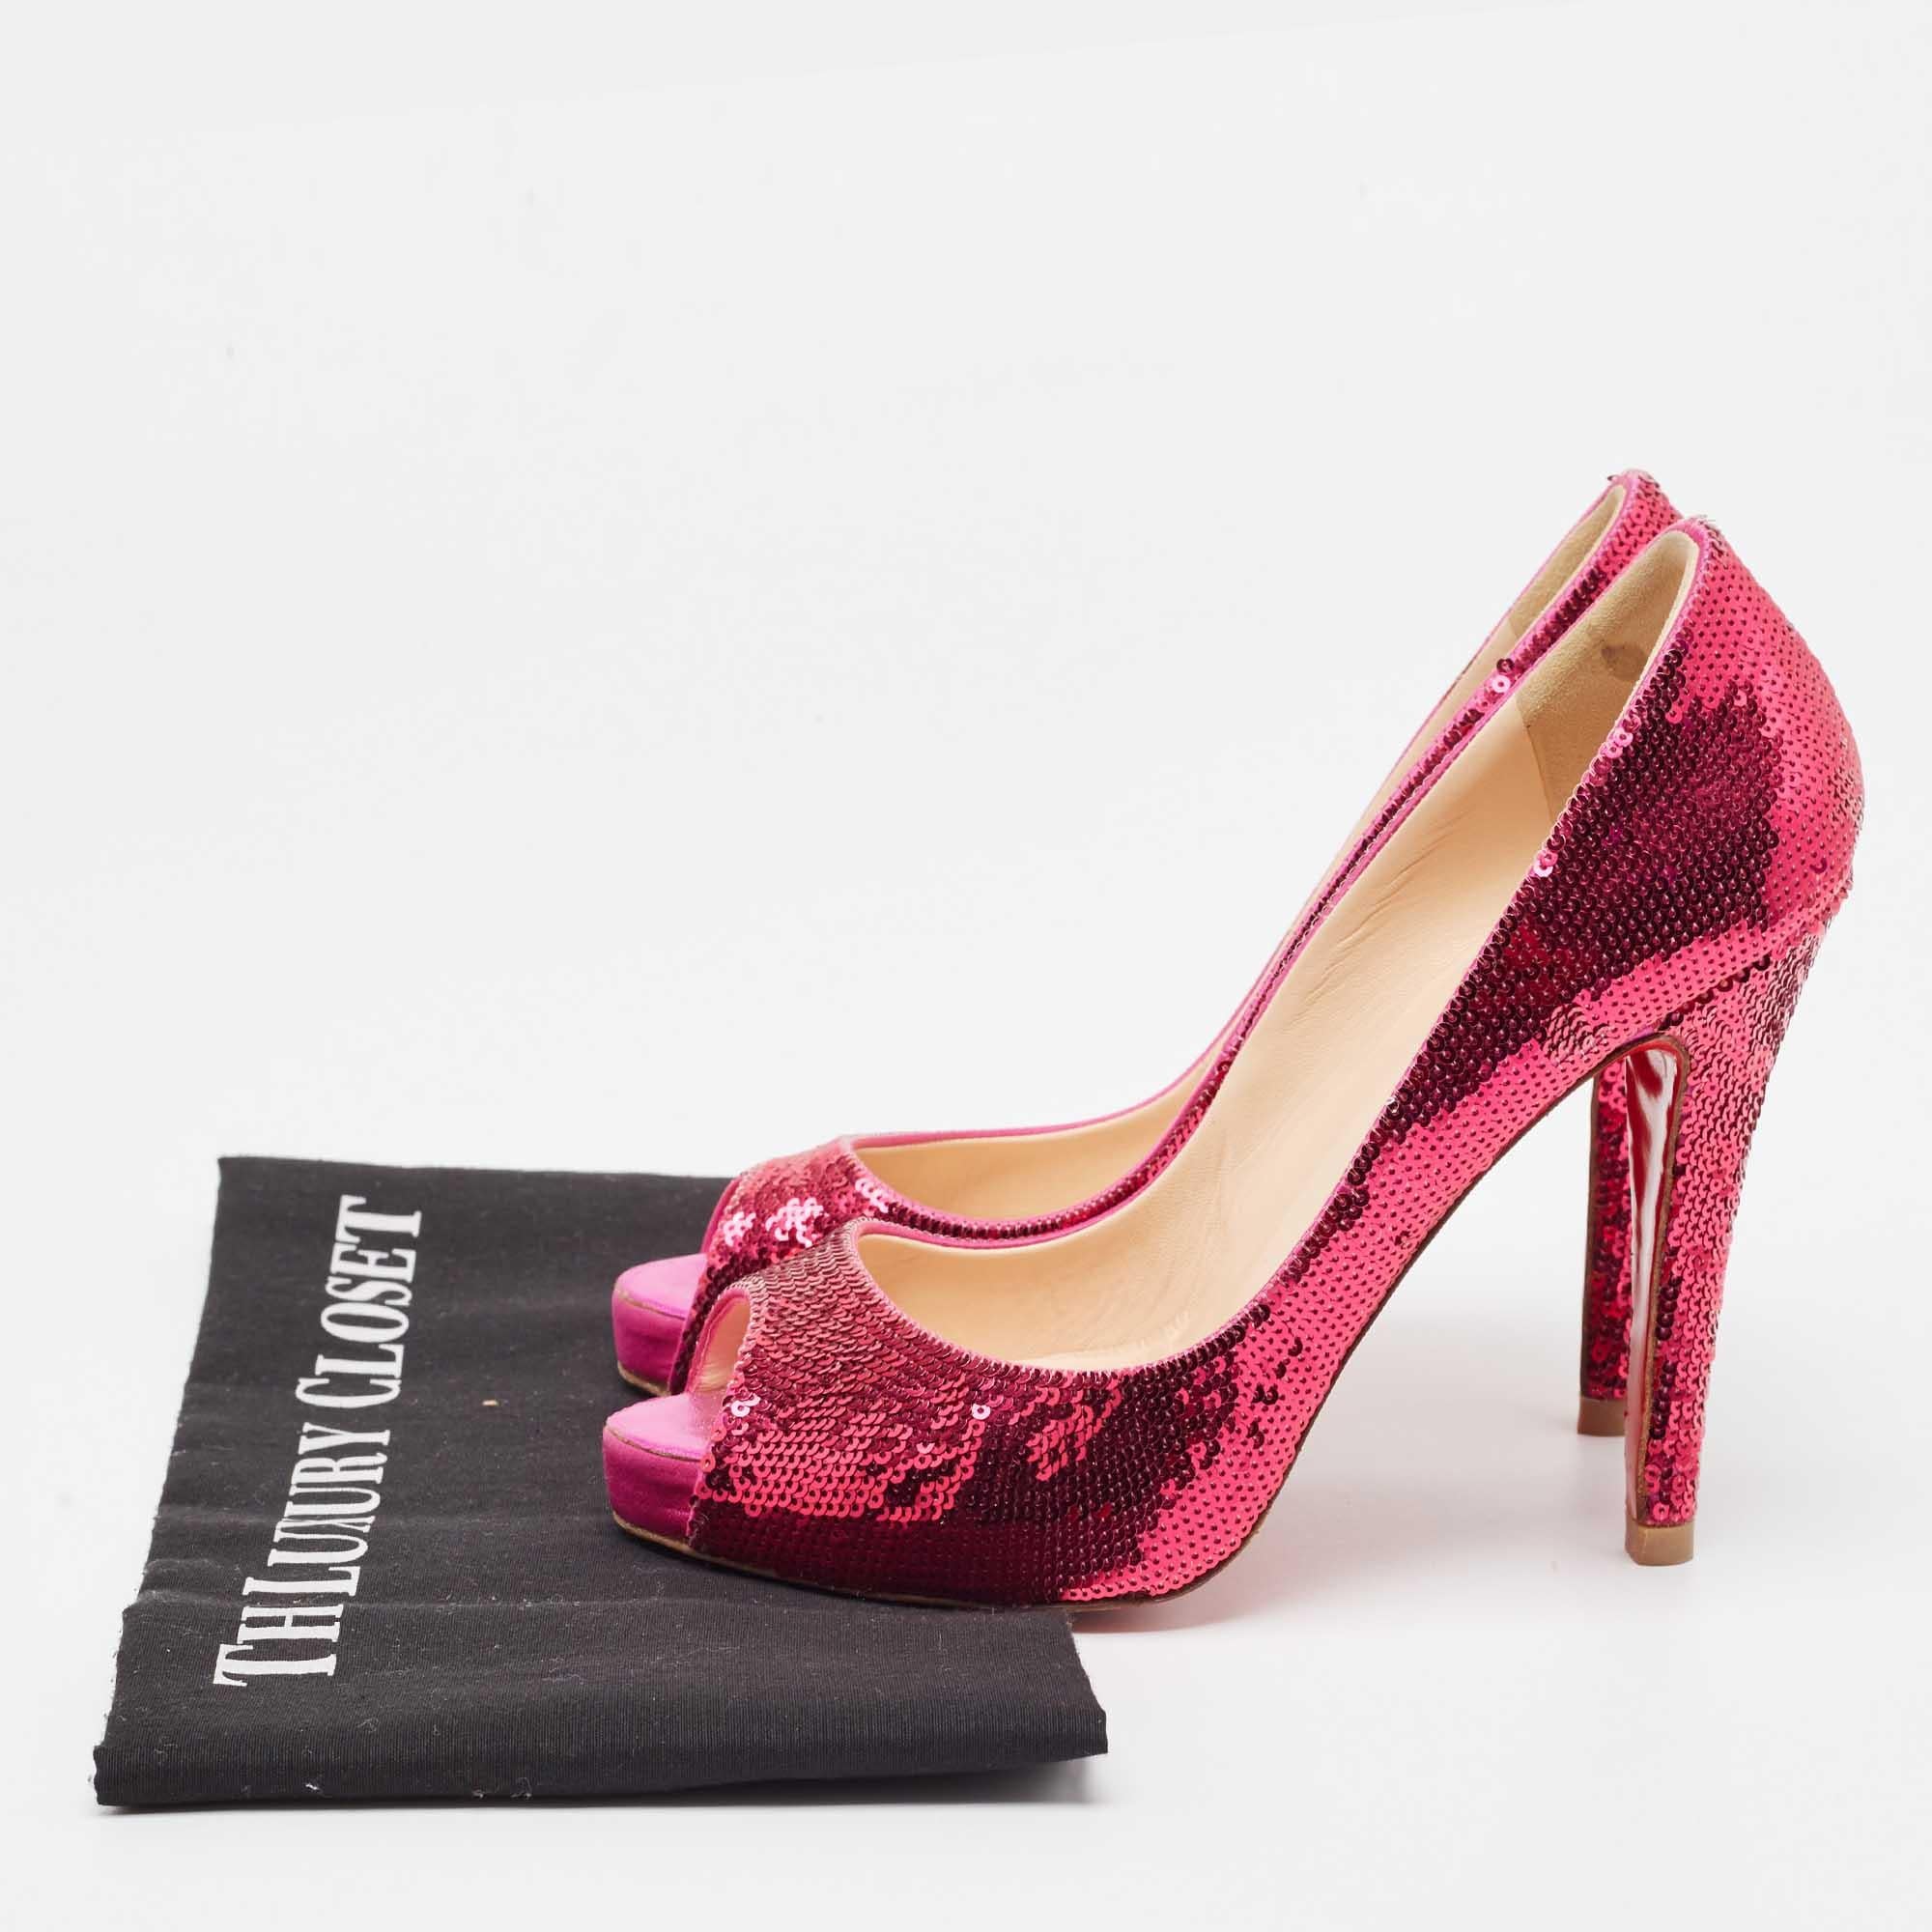 Christian Louboutin Pink Sequin Very Prive Pumps Size 37 For Sale 5